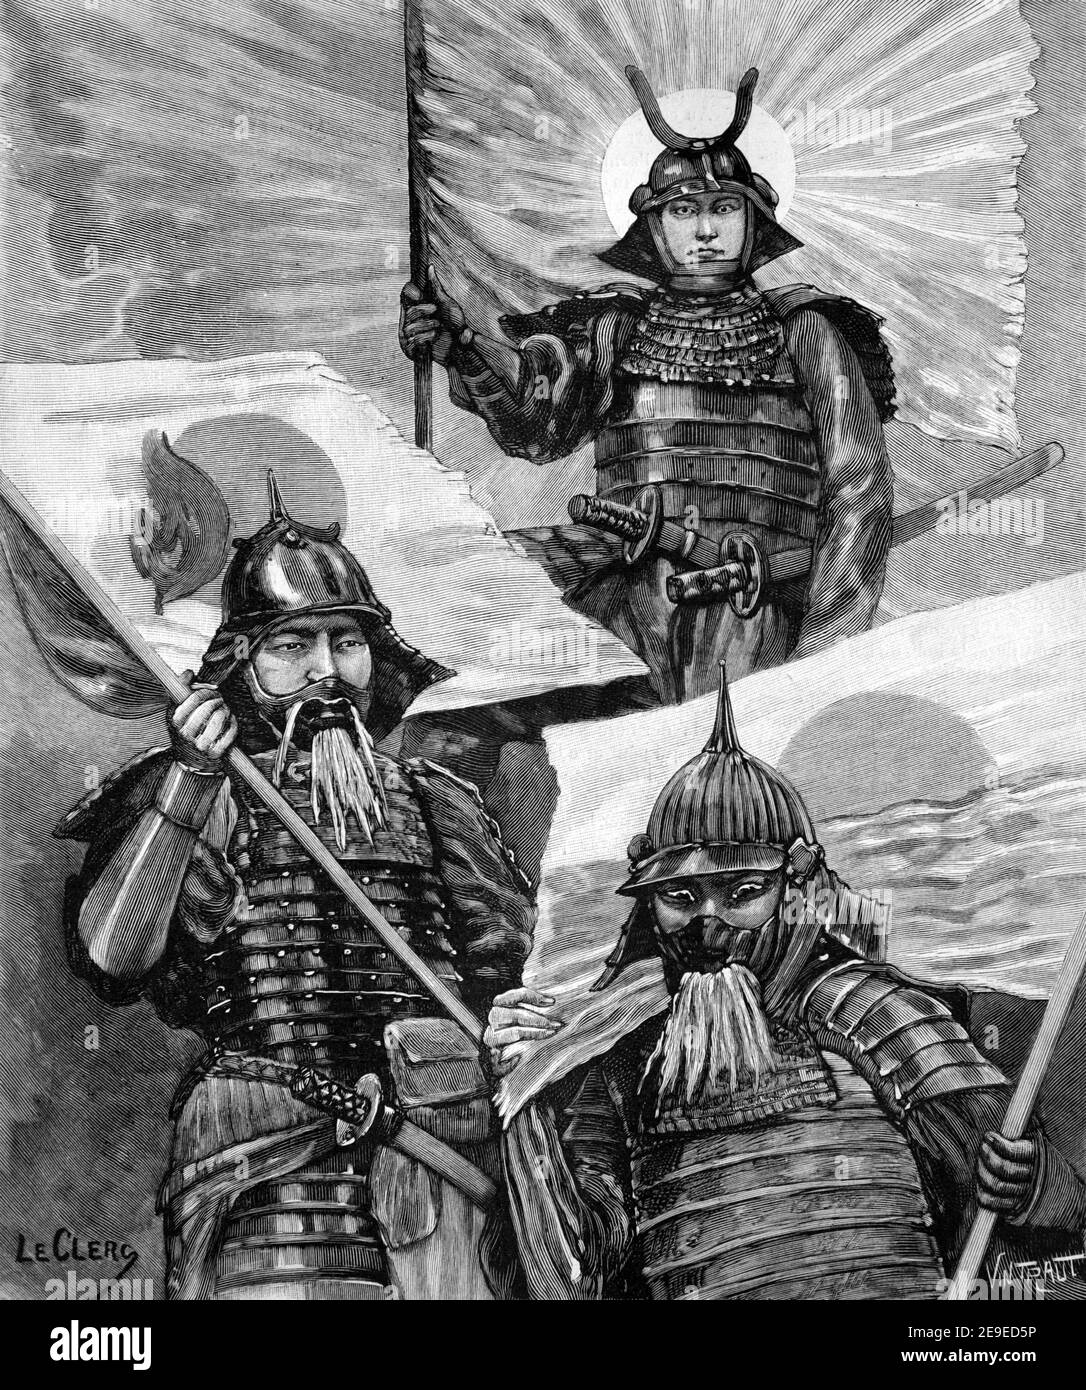 Sun Nations China Korea & Japan Armies or Soldiers Dressed in Armour or Military Uniforms Asia 1898 Vintage Illustration or Engraving Stock Photo